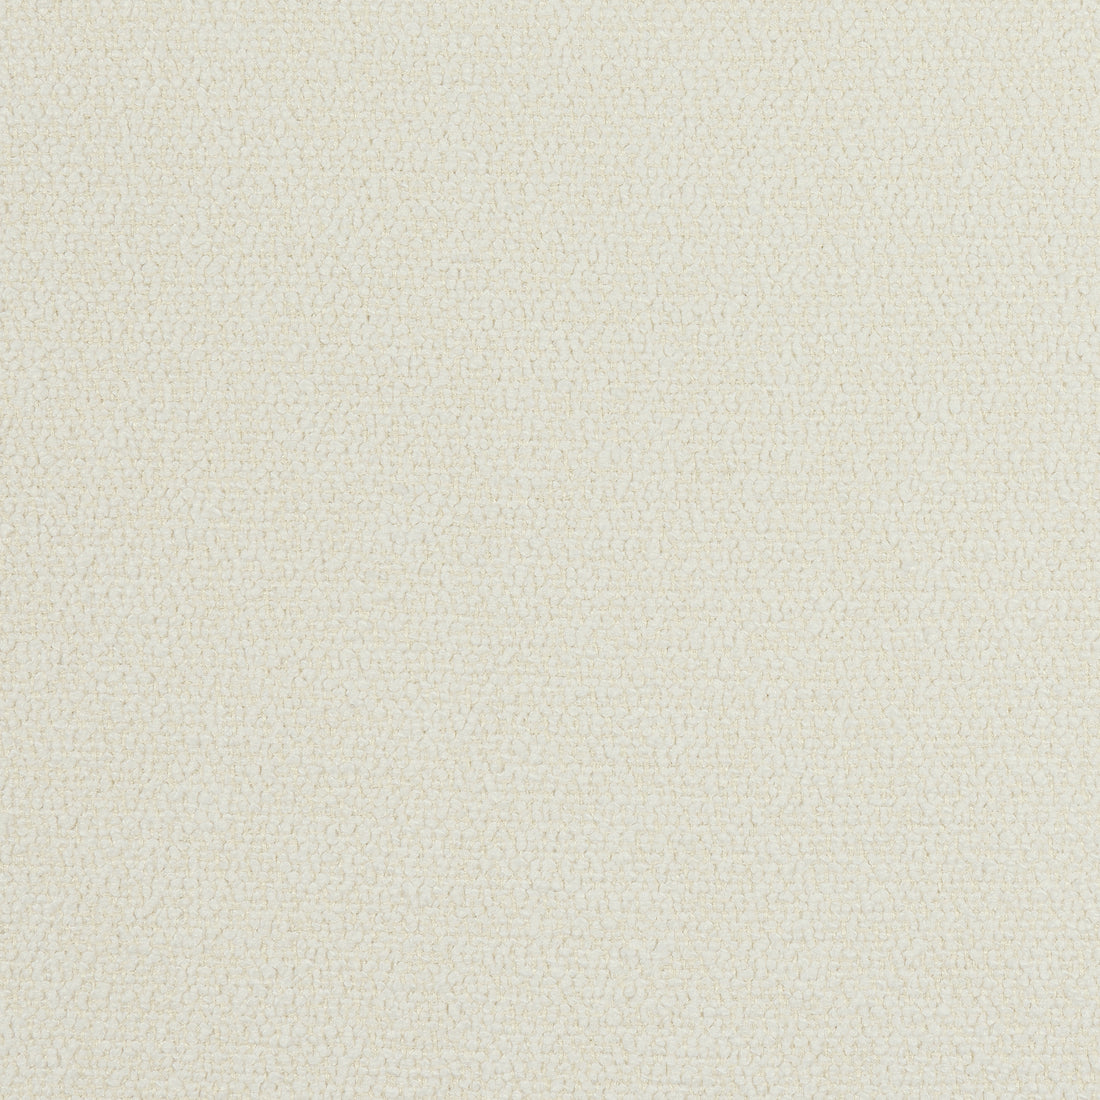 Dolcetto fabric in linen color - pattern number W8144 - by Thibaut in the Sereno collection